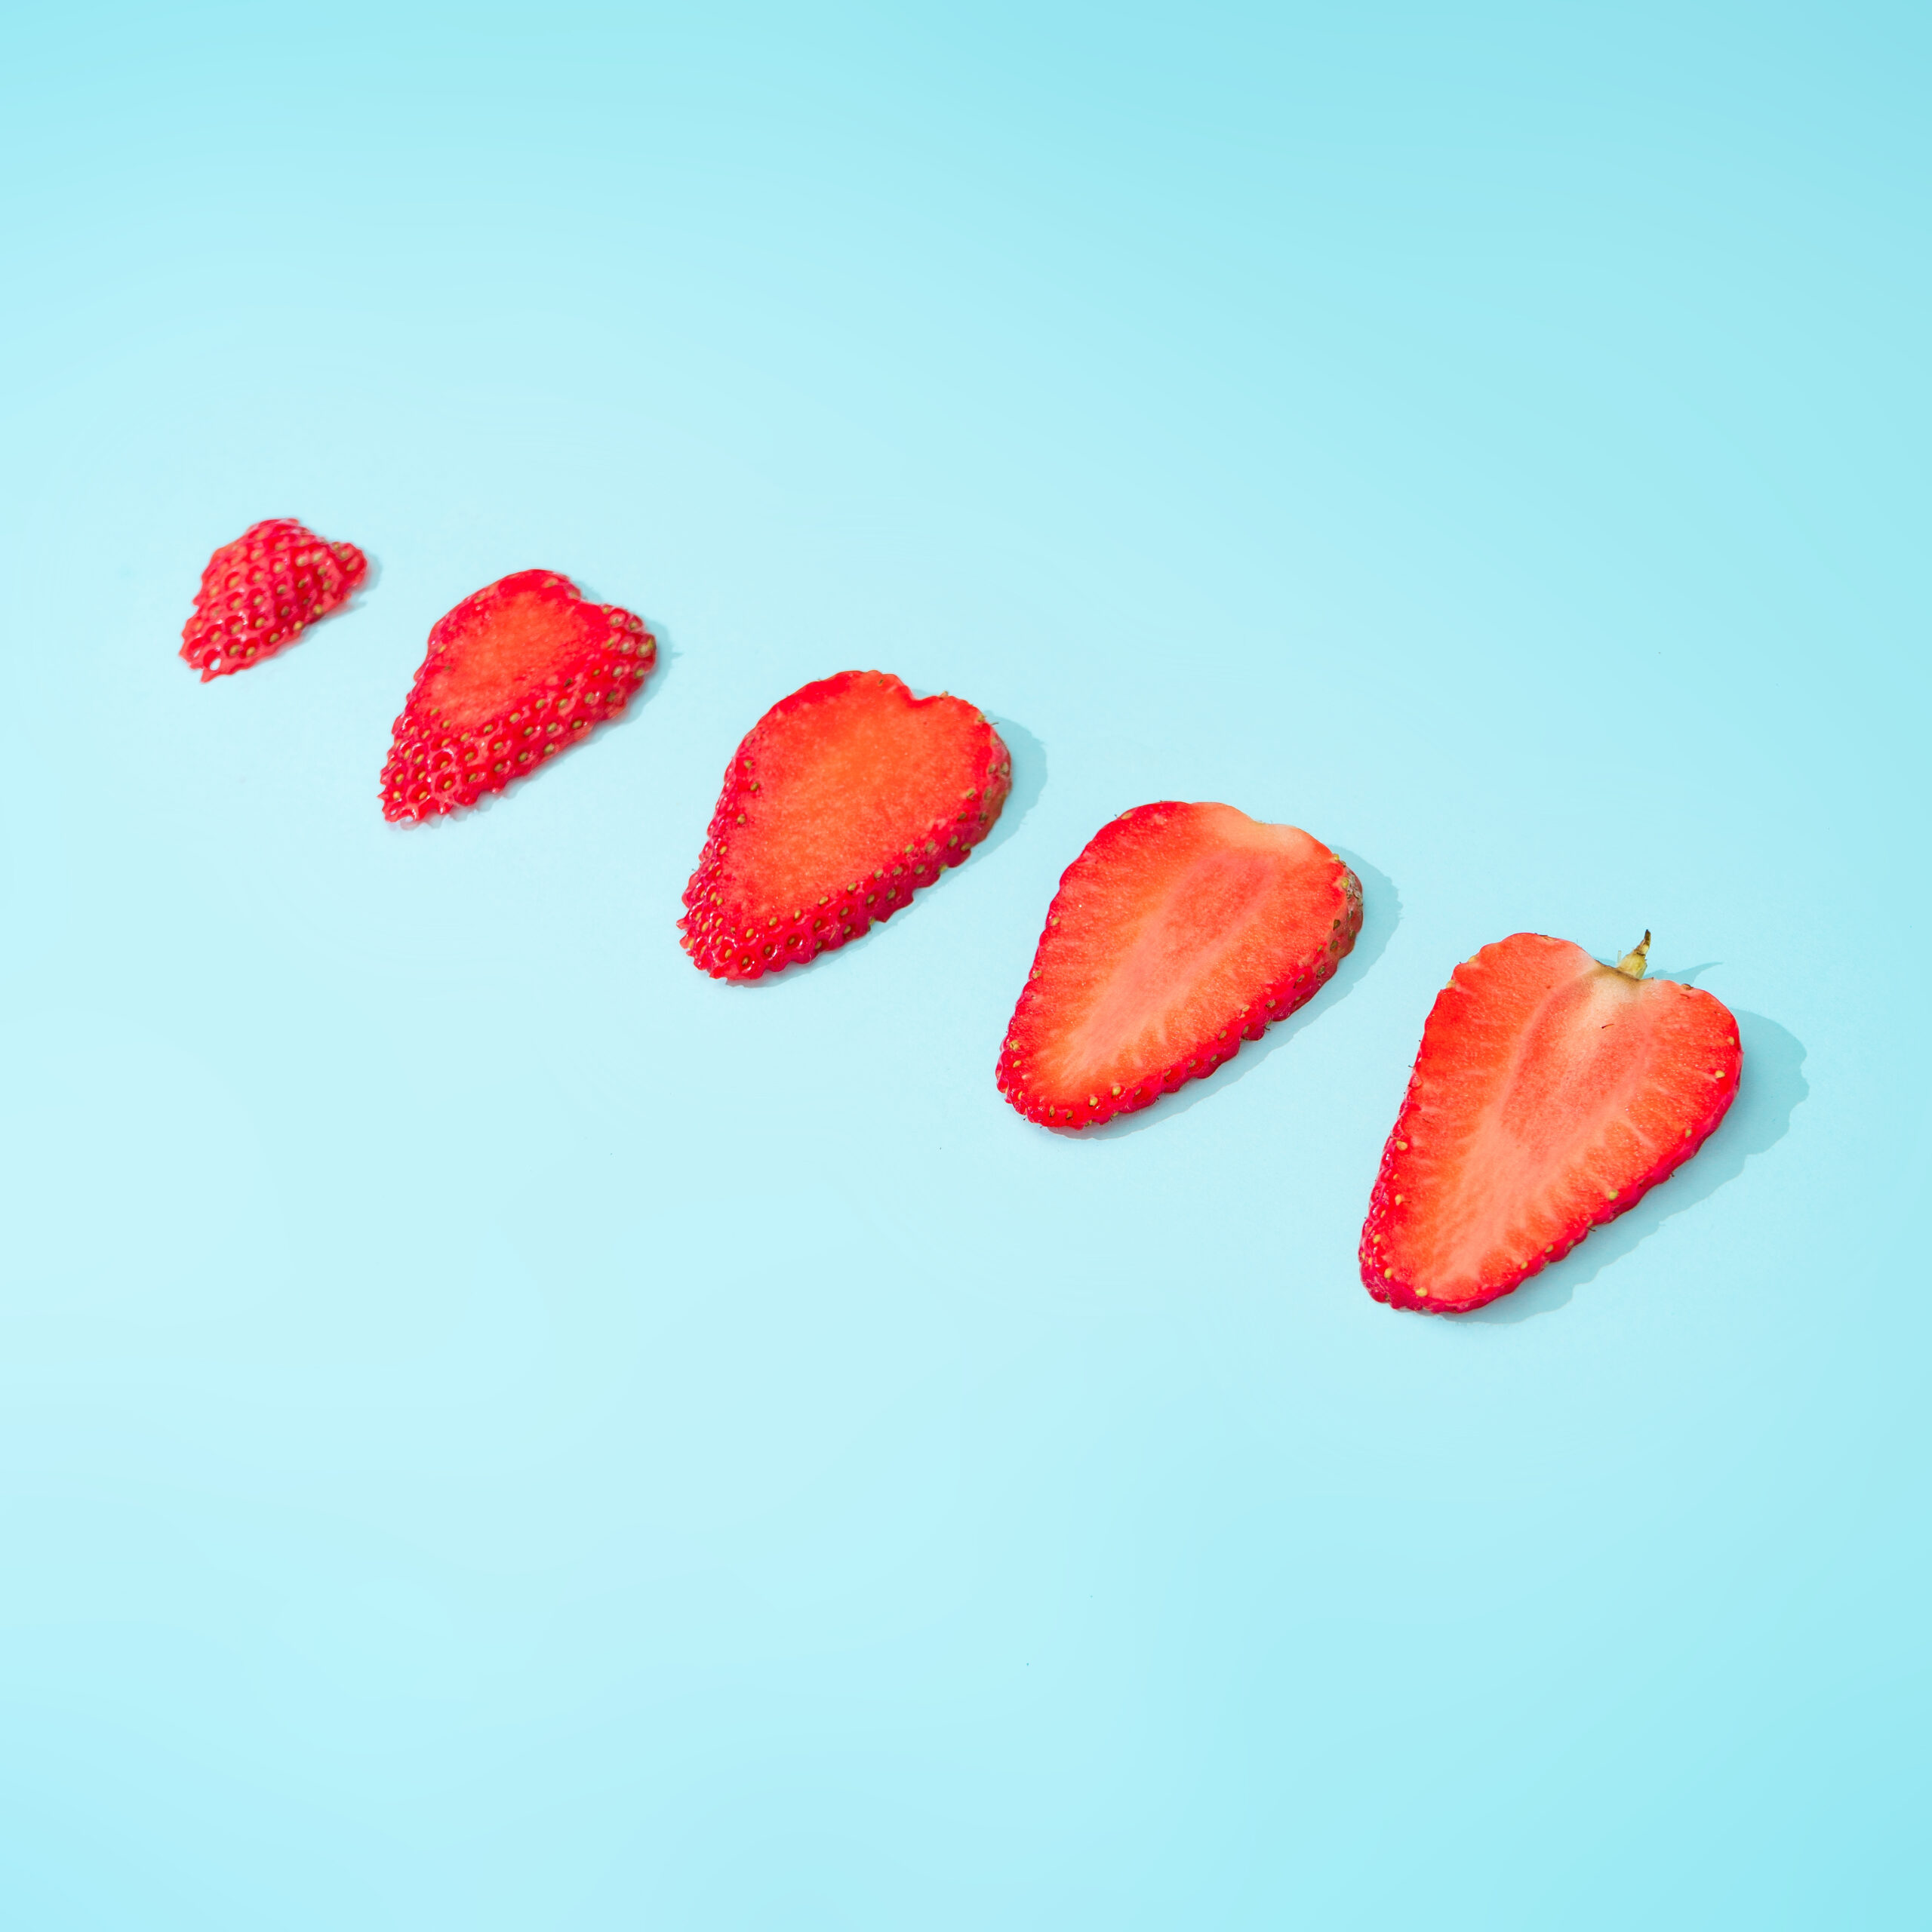 Creative summer background composition with strawberry slices.  Minimal fruit concept